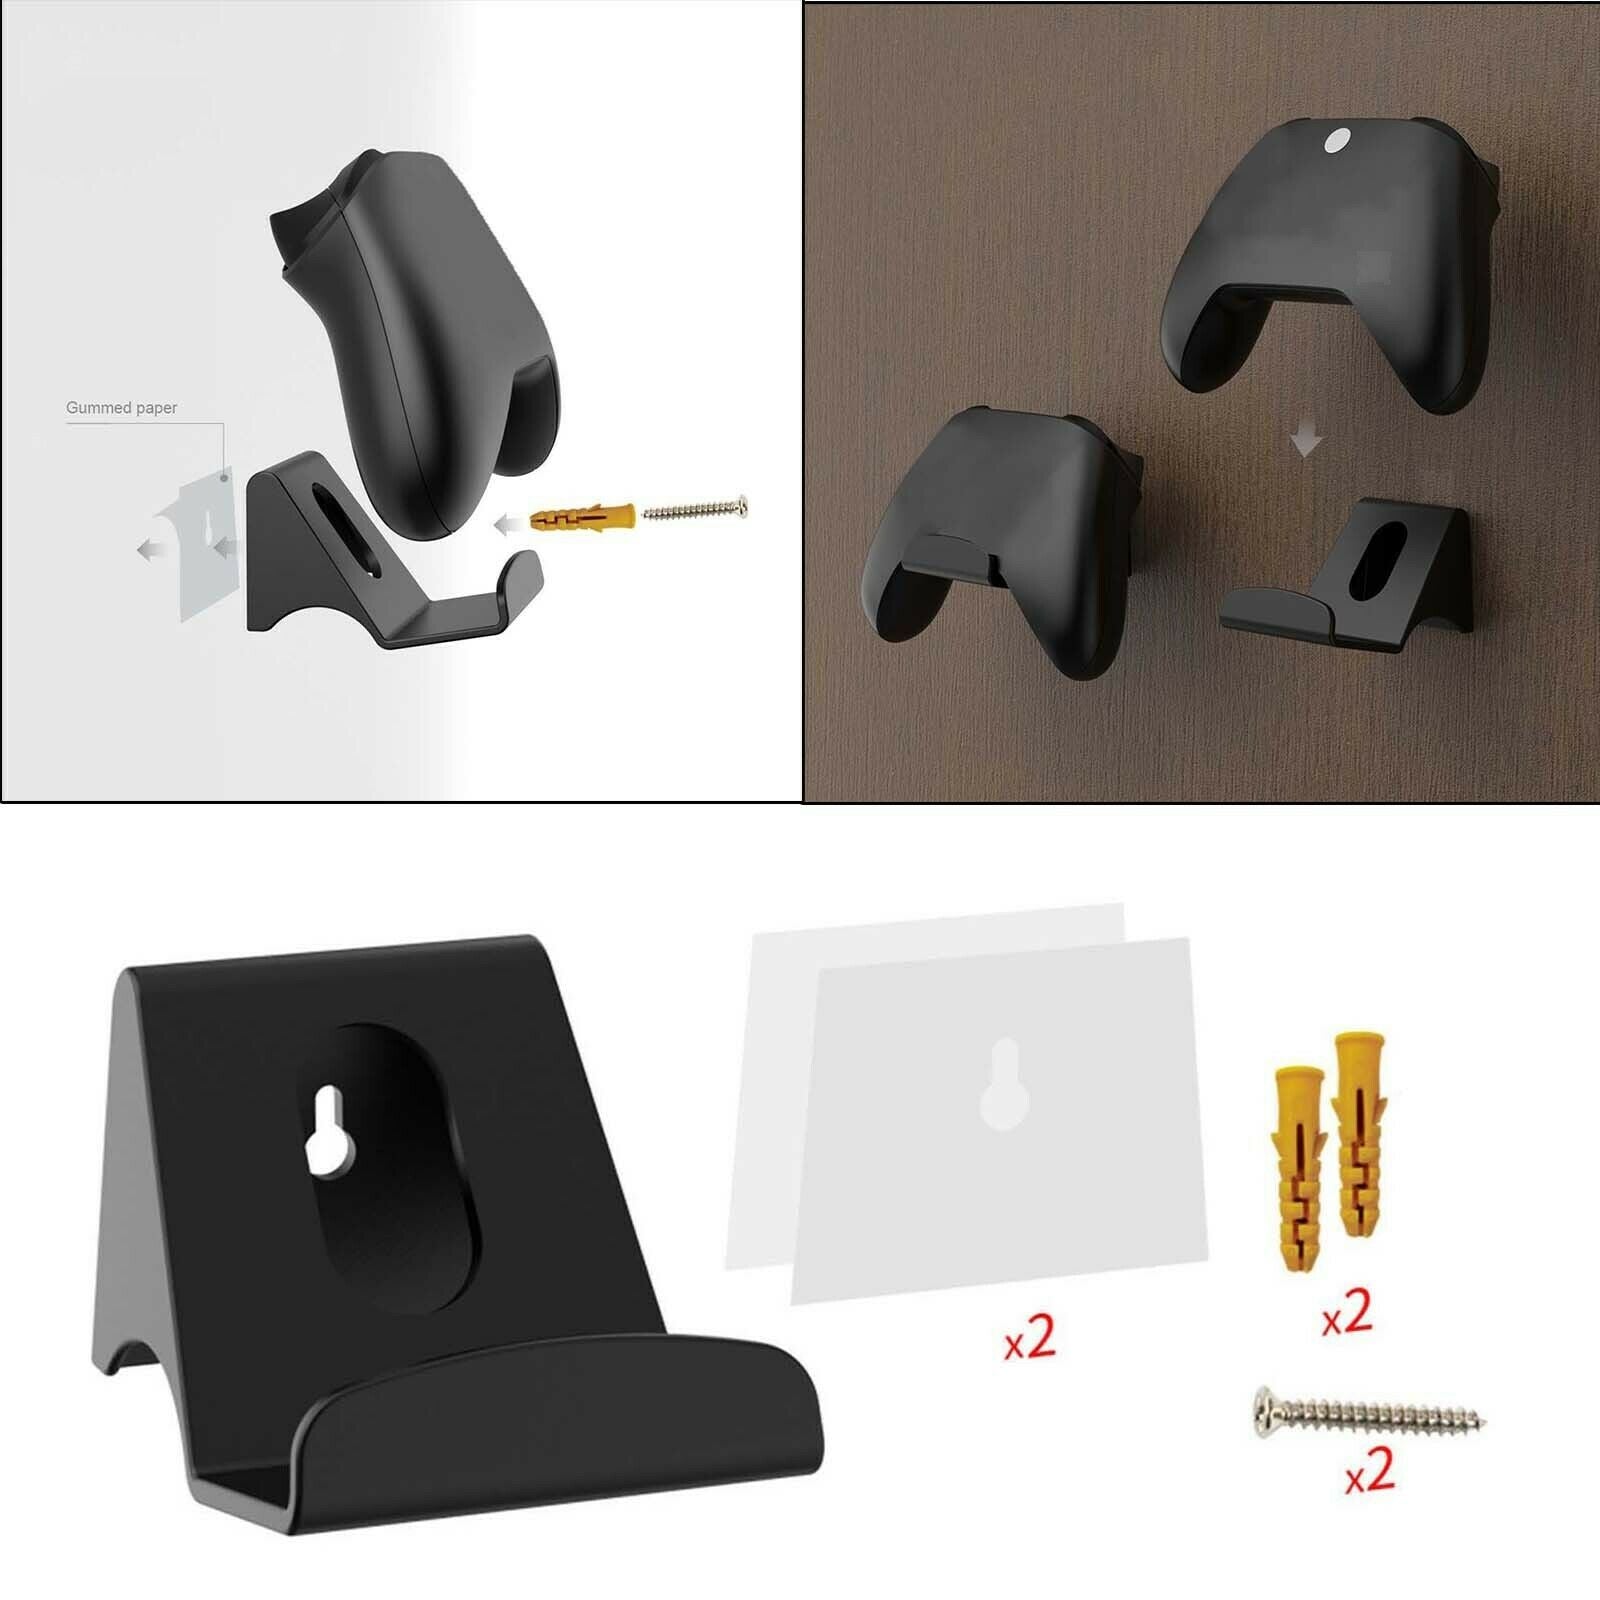 Game Handle Hook Headset Holder Accessories Organizer for PS4 for PS5 Black